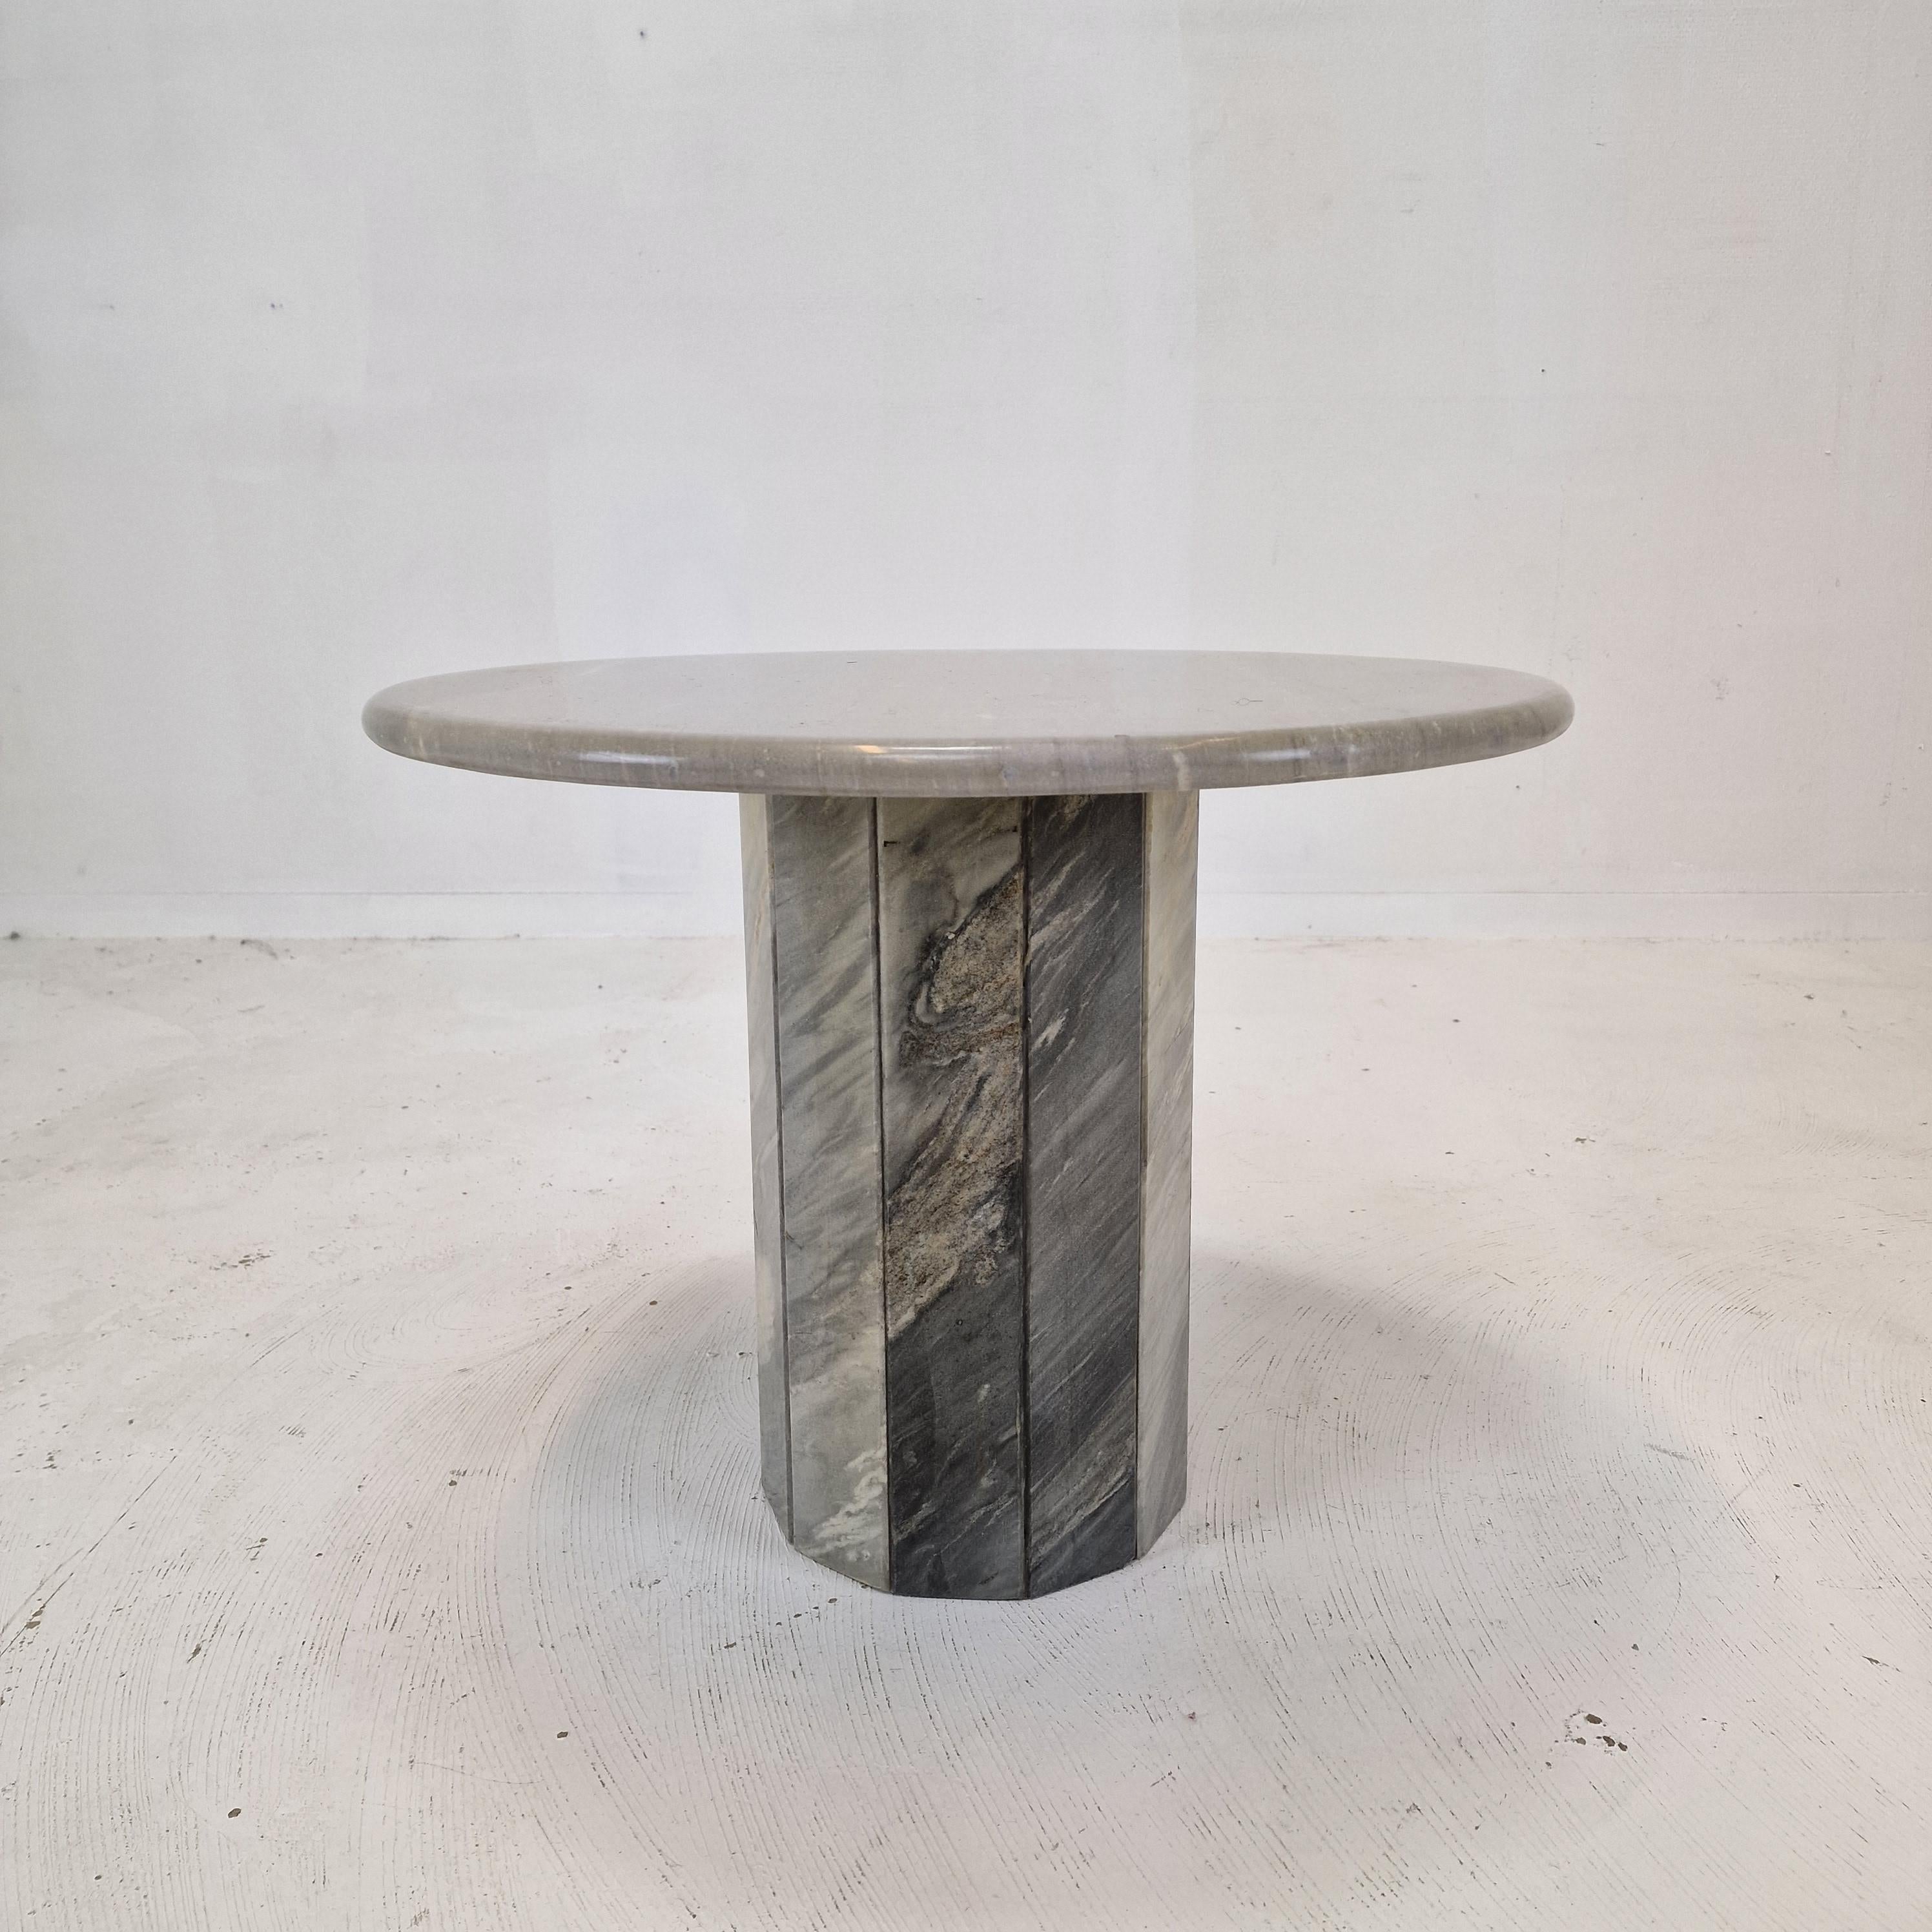 Hand-Crafted Round Italian Marble Coffee or Side Table, 1980's For Sale